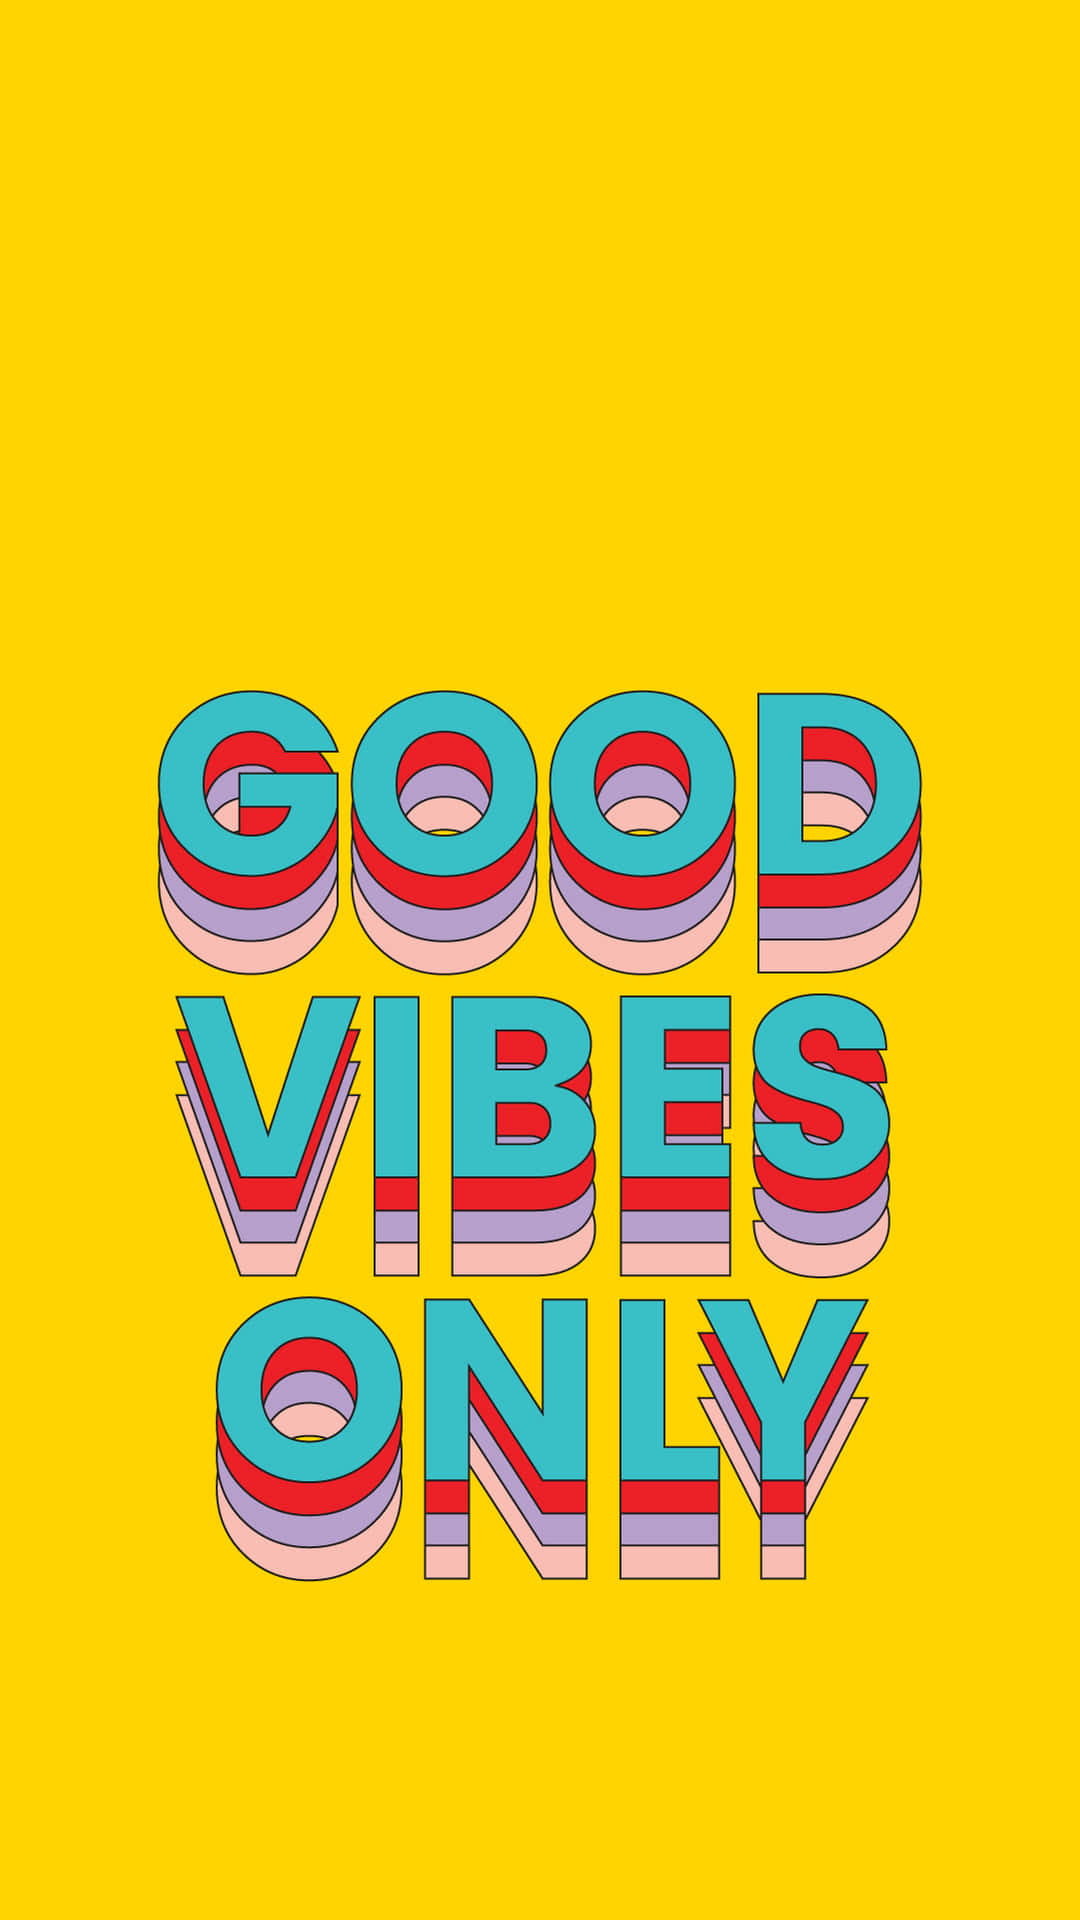 Good Vibes Only - A Yellow Background With Blue And Red Letters